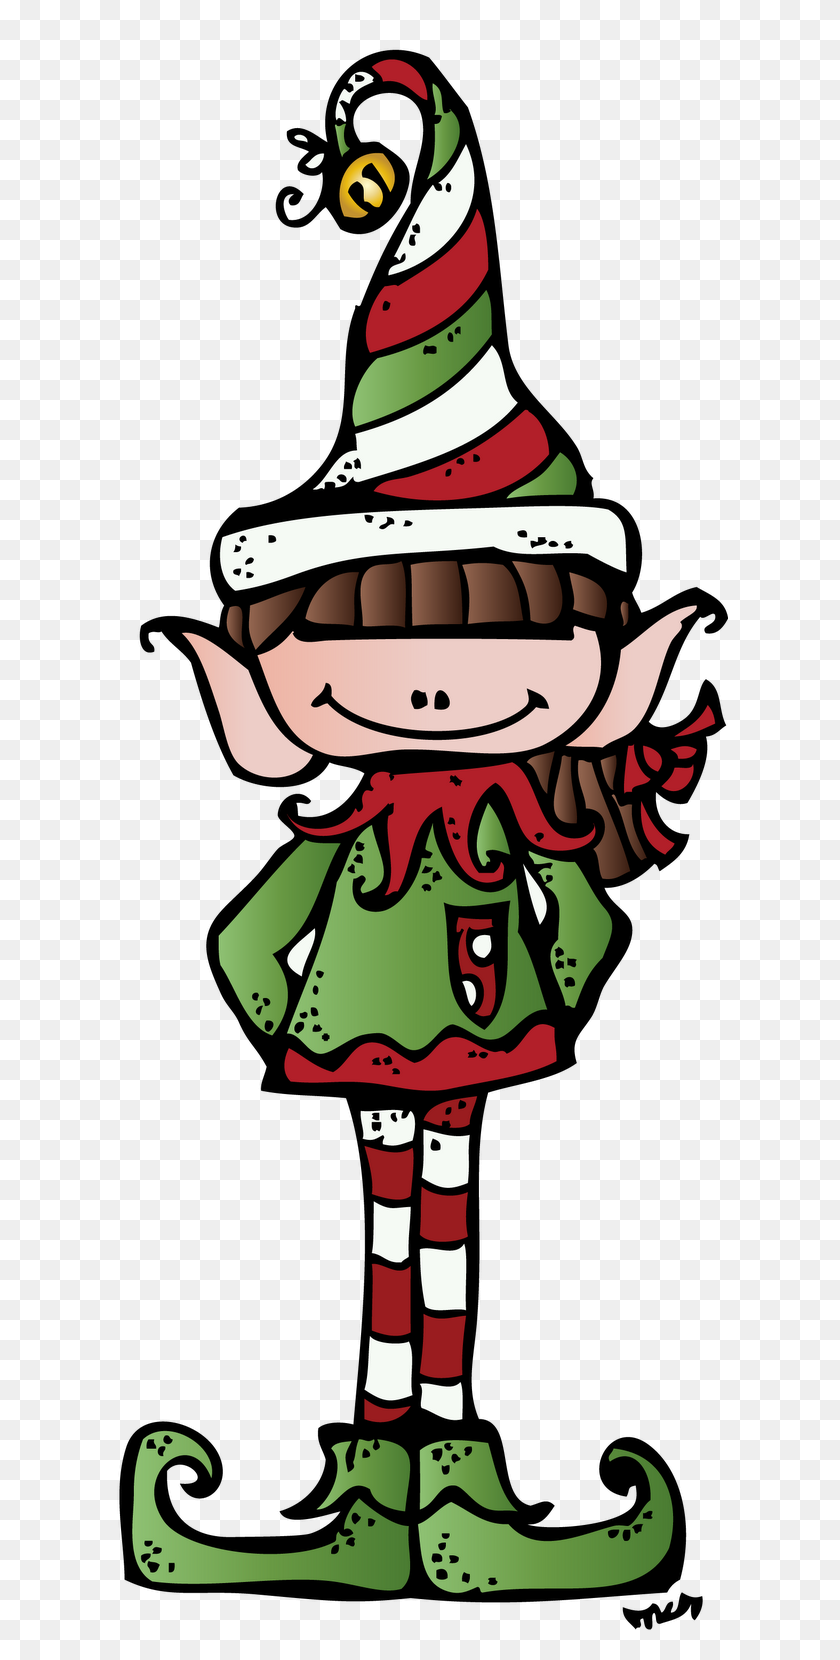 616x1600 Melonheadz Simple Crafts Clip Art, Elves And Canvases - Christmas Holiday Clip Art